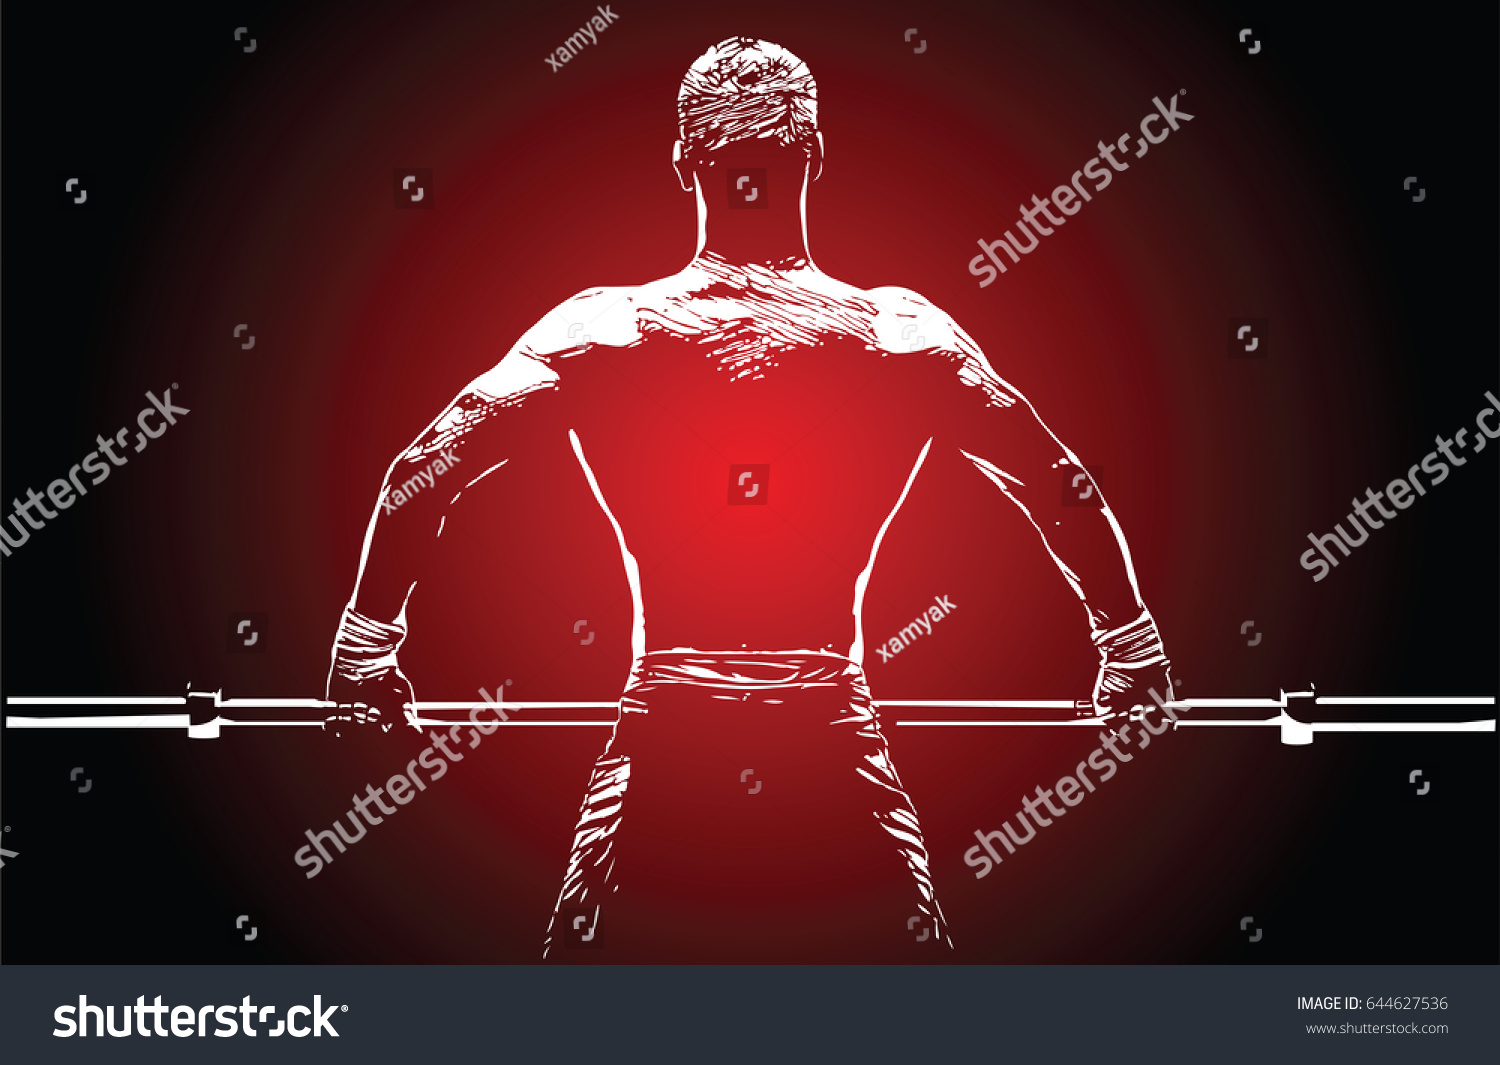 SVG of The back of the athlete holding the barbell in hands svg